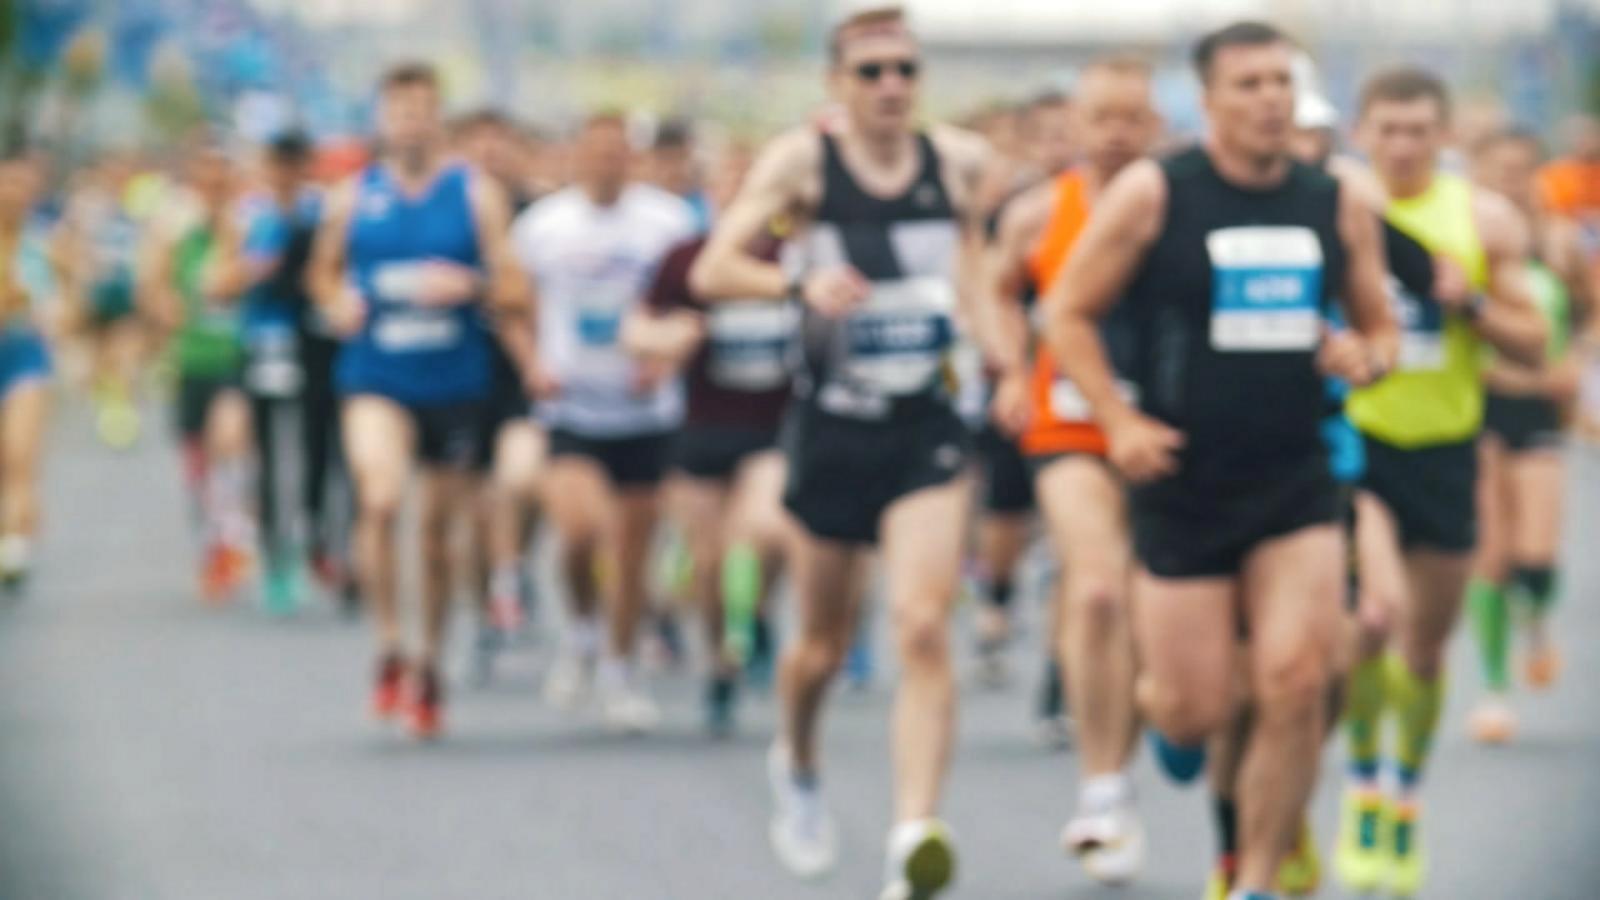 VIDEO: Running and the mental health benefits